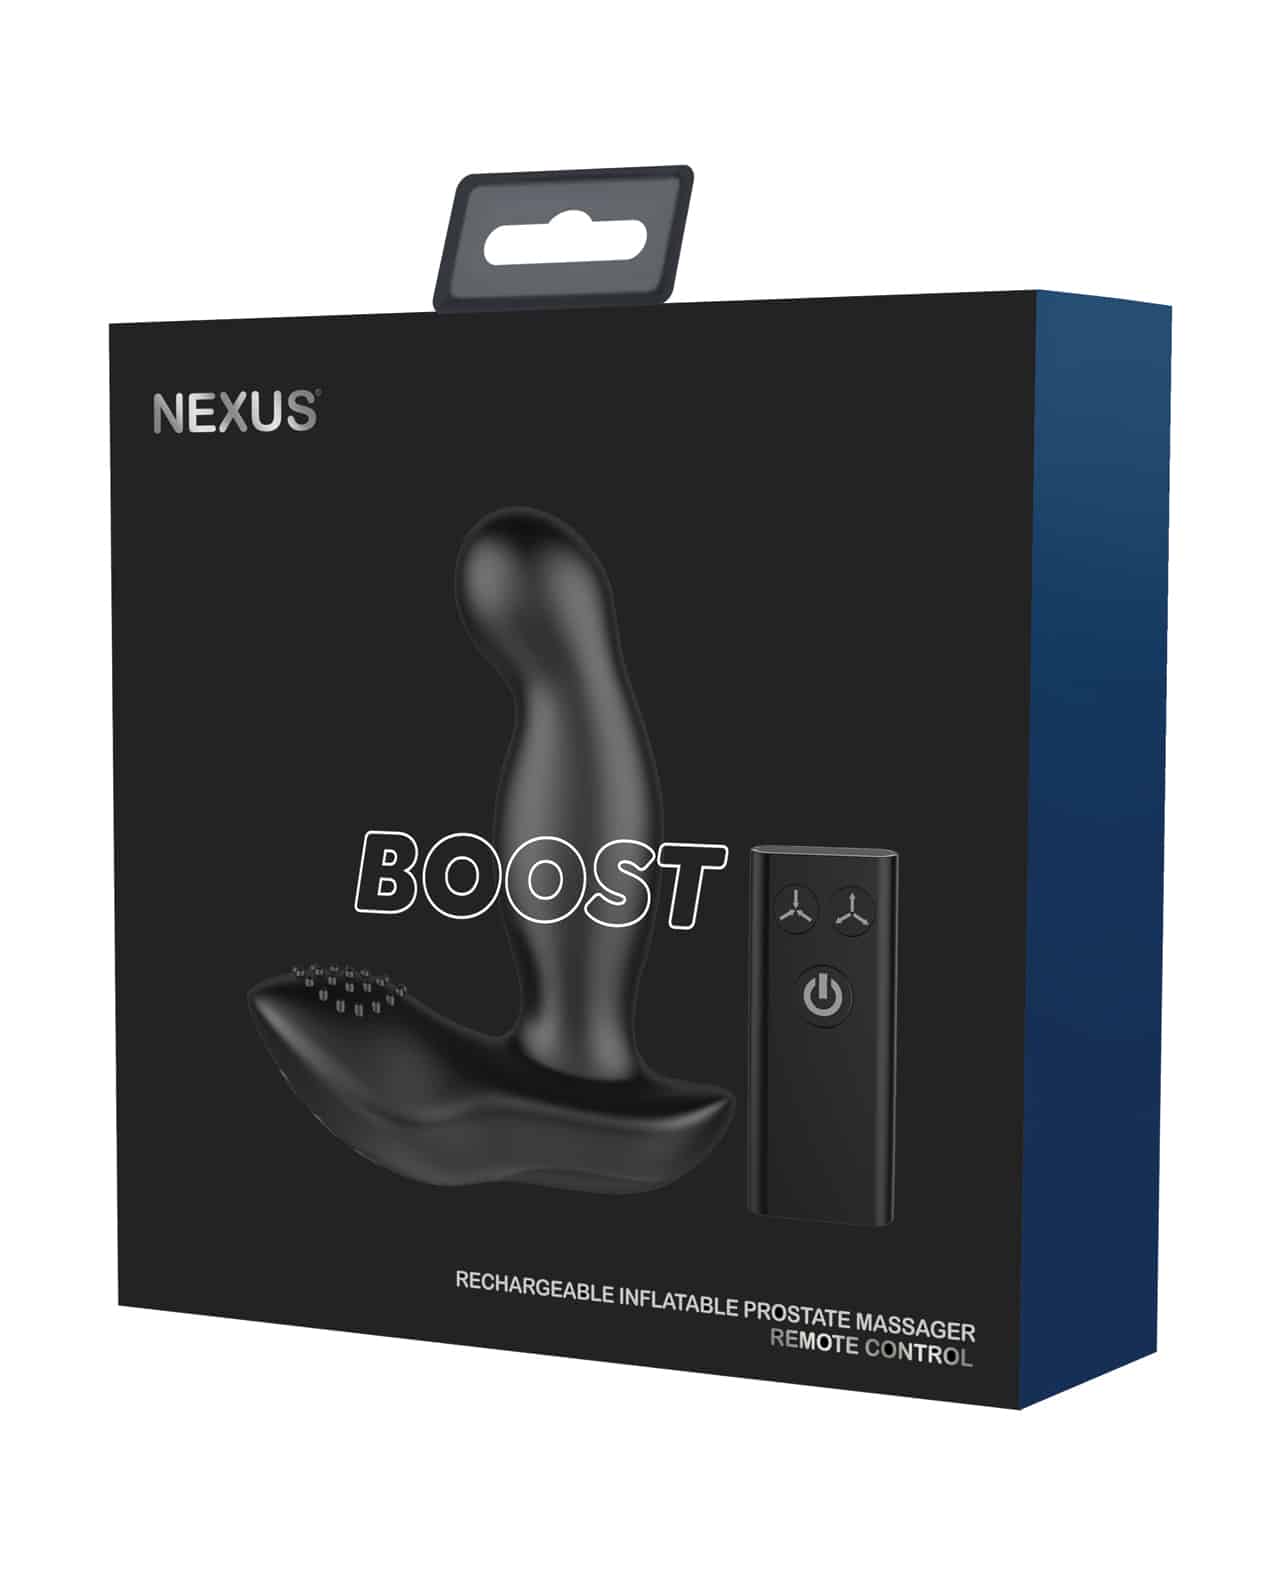 Nexus Boost Prostate Massager with Inflatable Tip Black